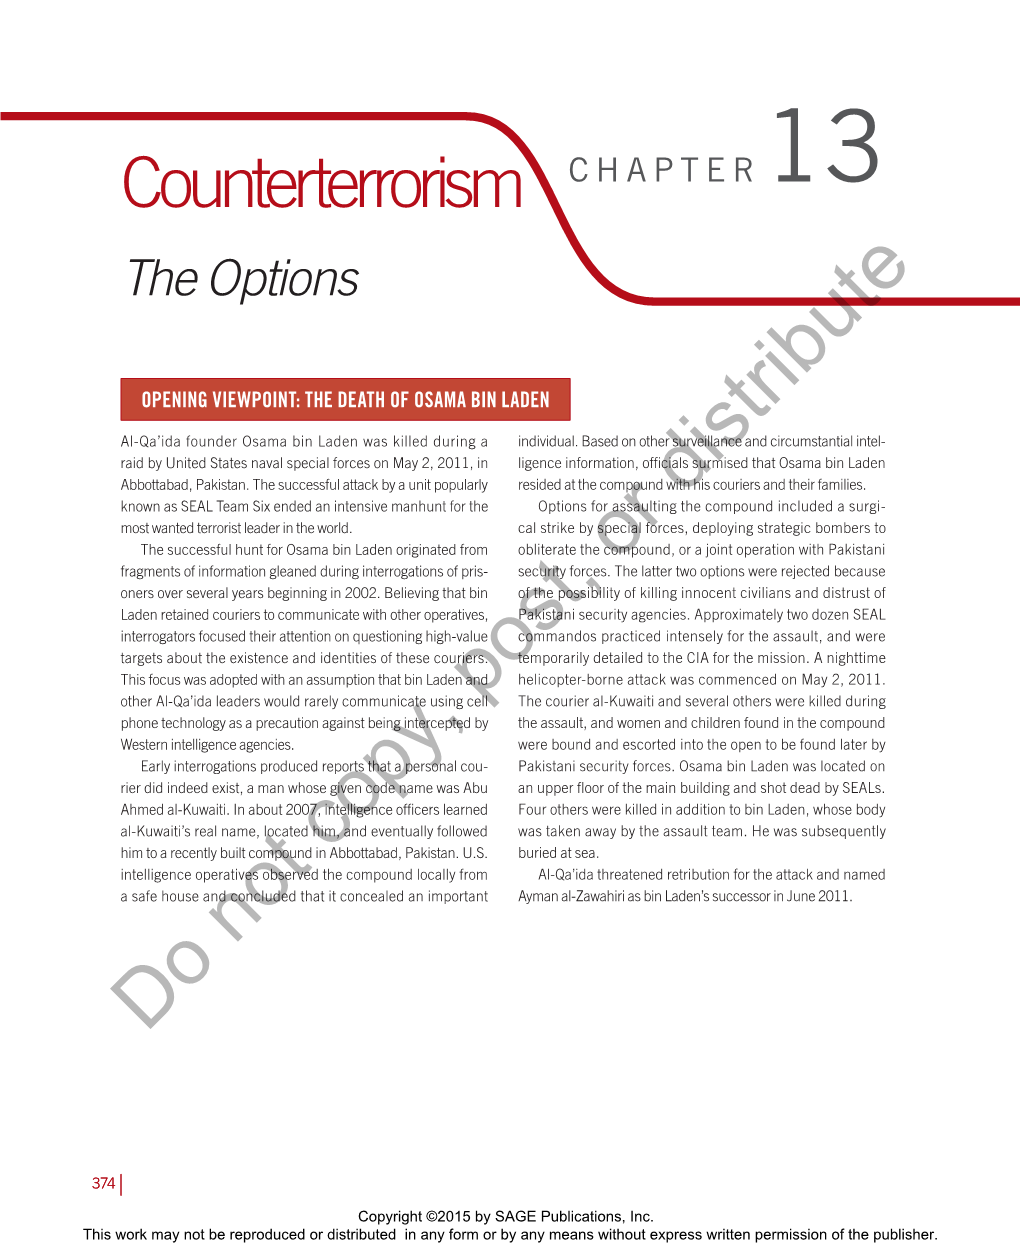 Counterterrorism CHAPTER 13 the Options